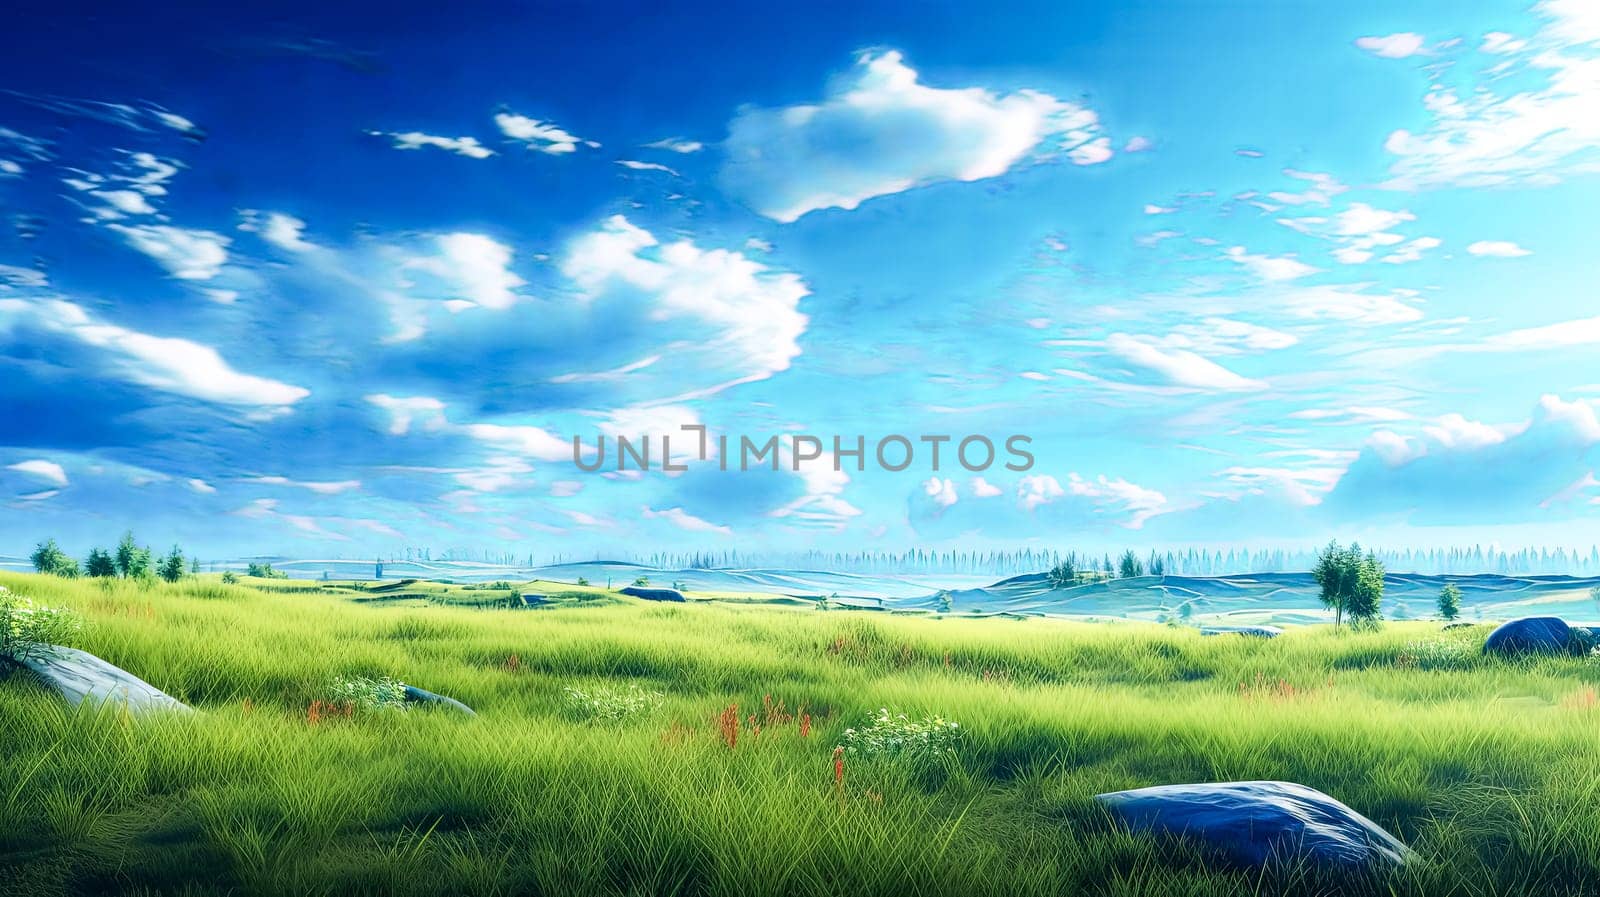 A large field of grass with a few trees in the background. The sky is blue with some clouds